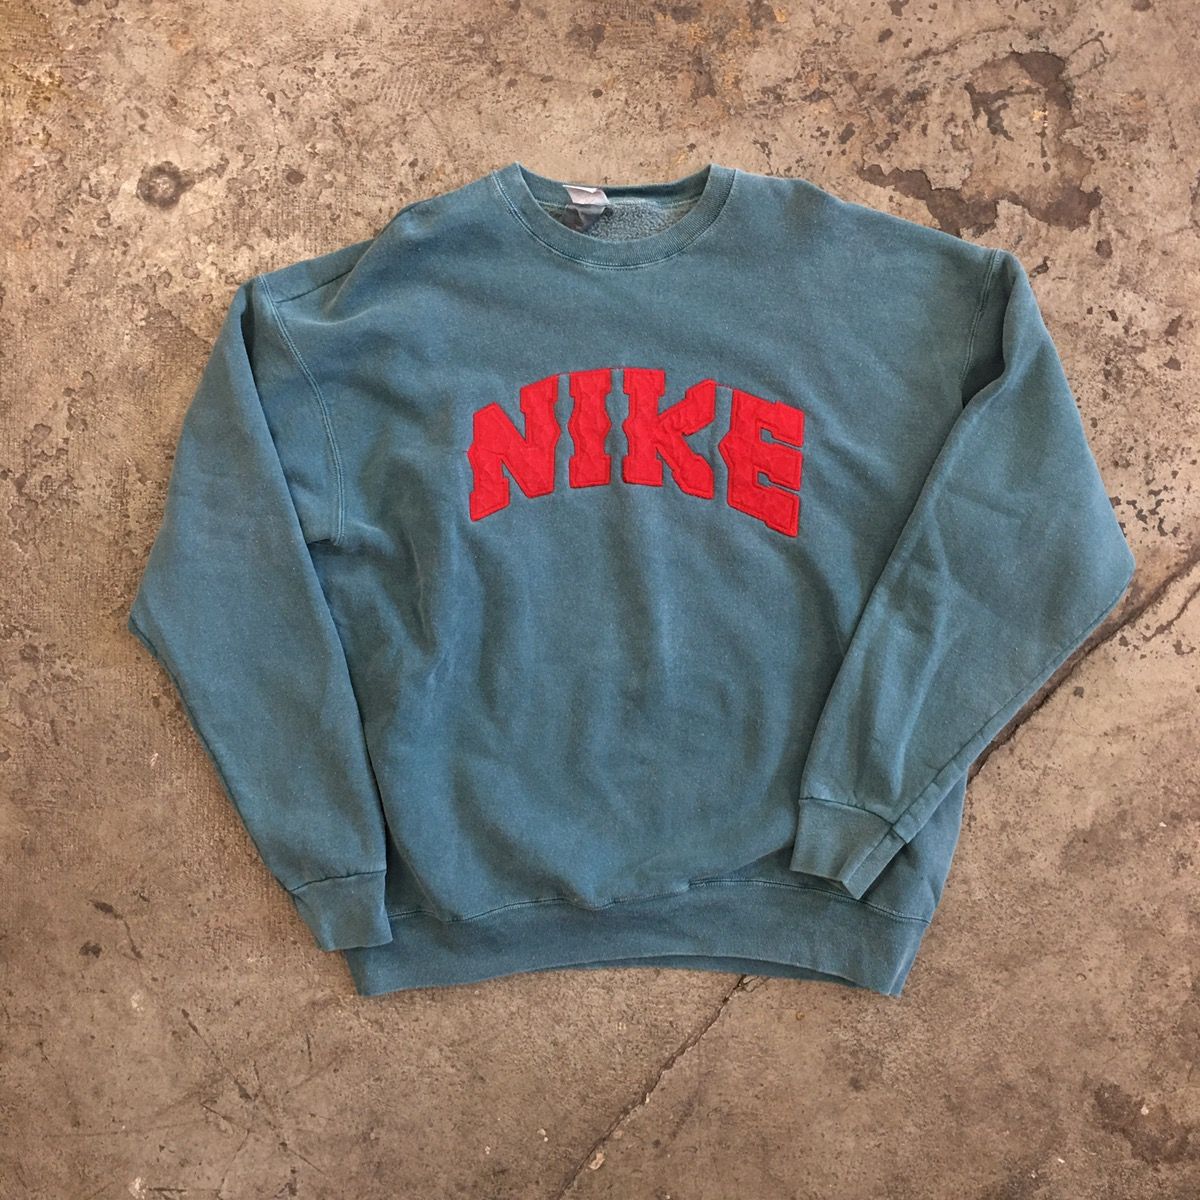 Nike VINTAGE 90s NIKE AIR FADED SPELL OUT PULLOVER SWEATSHIRT Size US XL / EU 56 / 4 - 1 Preview